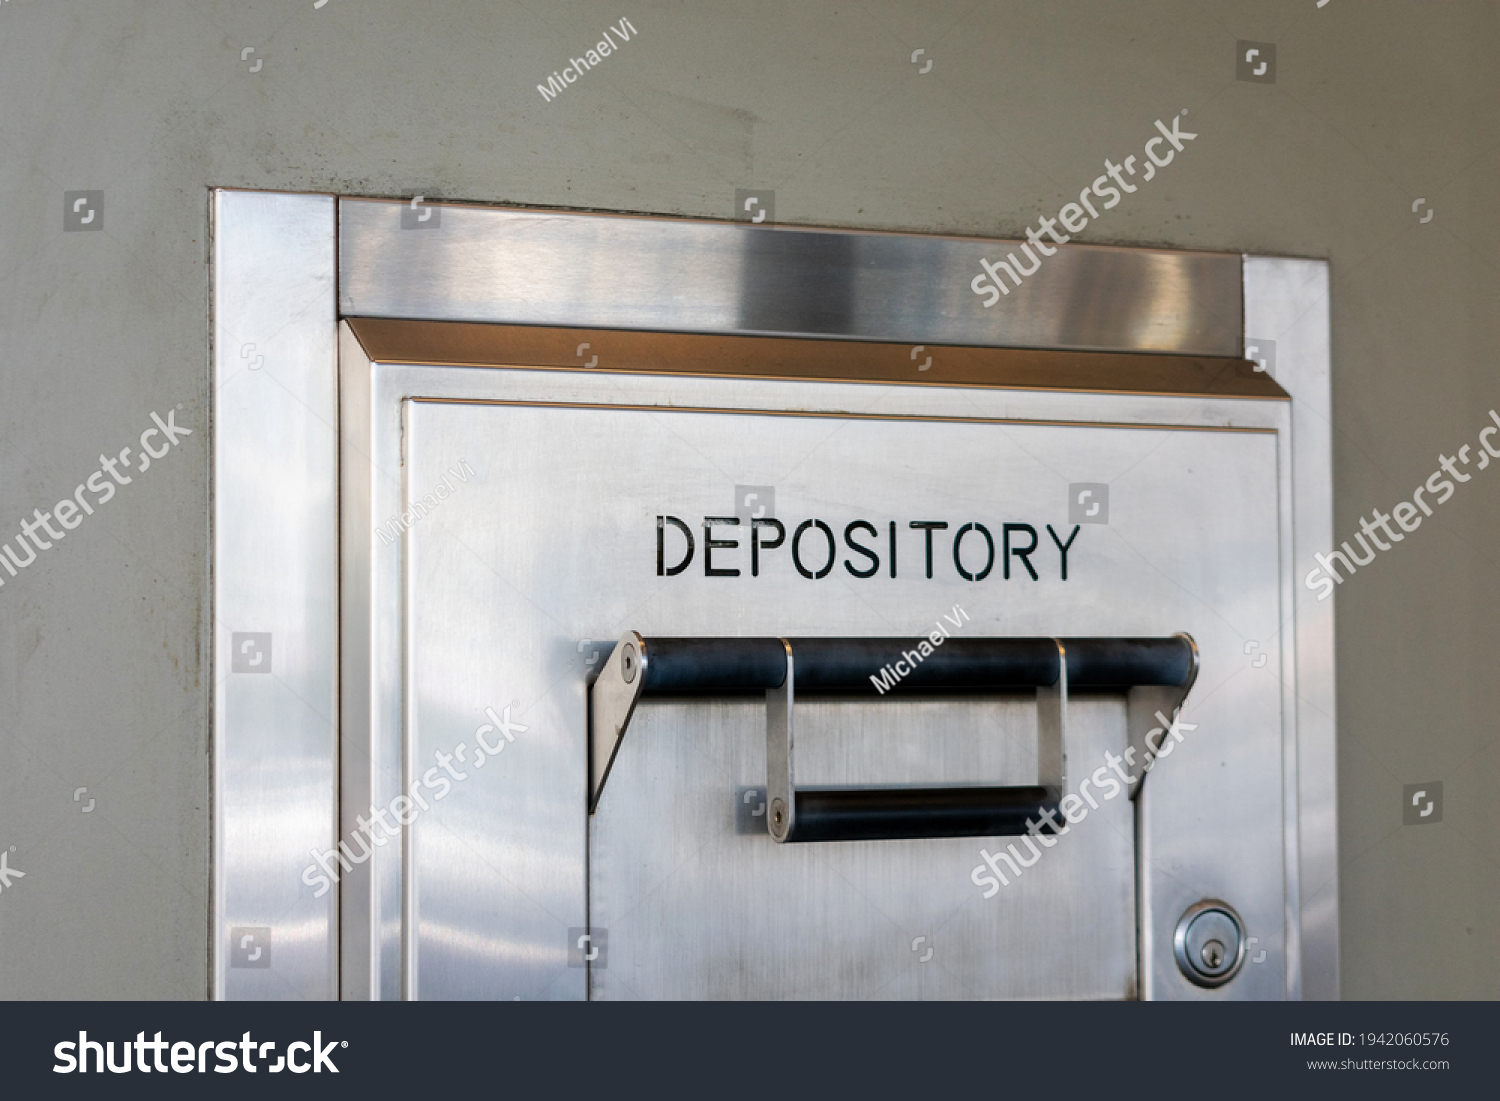 Depository sign on an exterior secured bank drop box attached to the wall of a bank building #1942060576